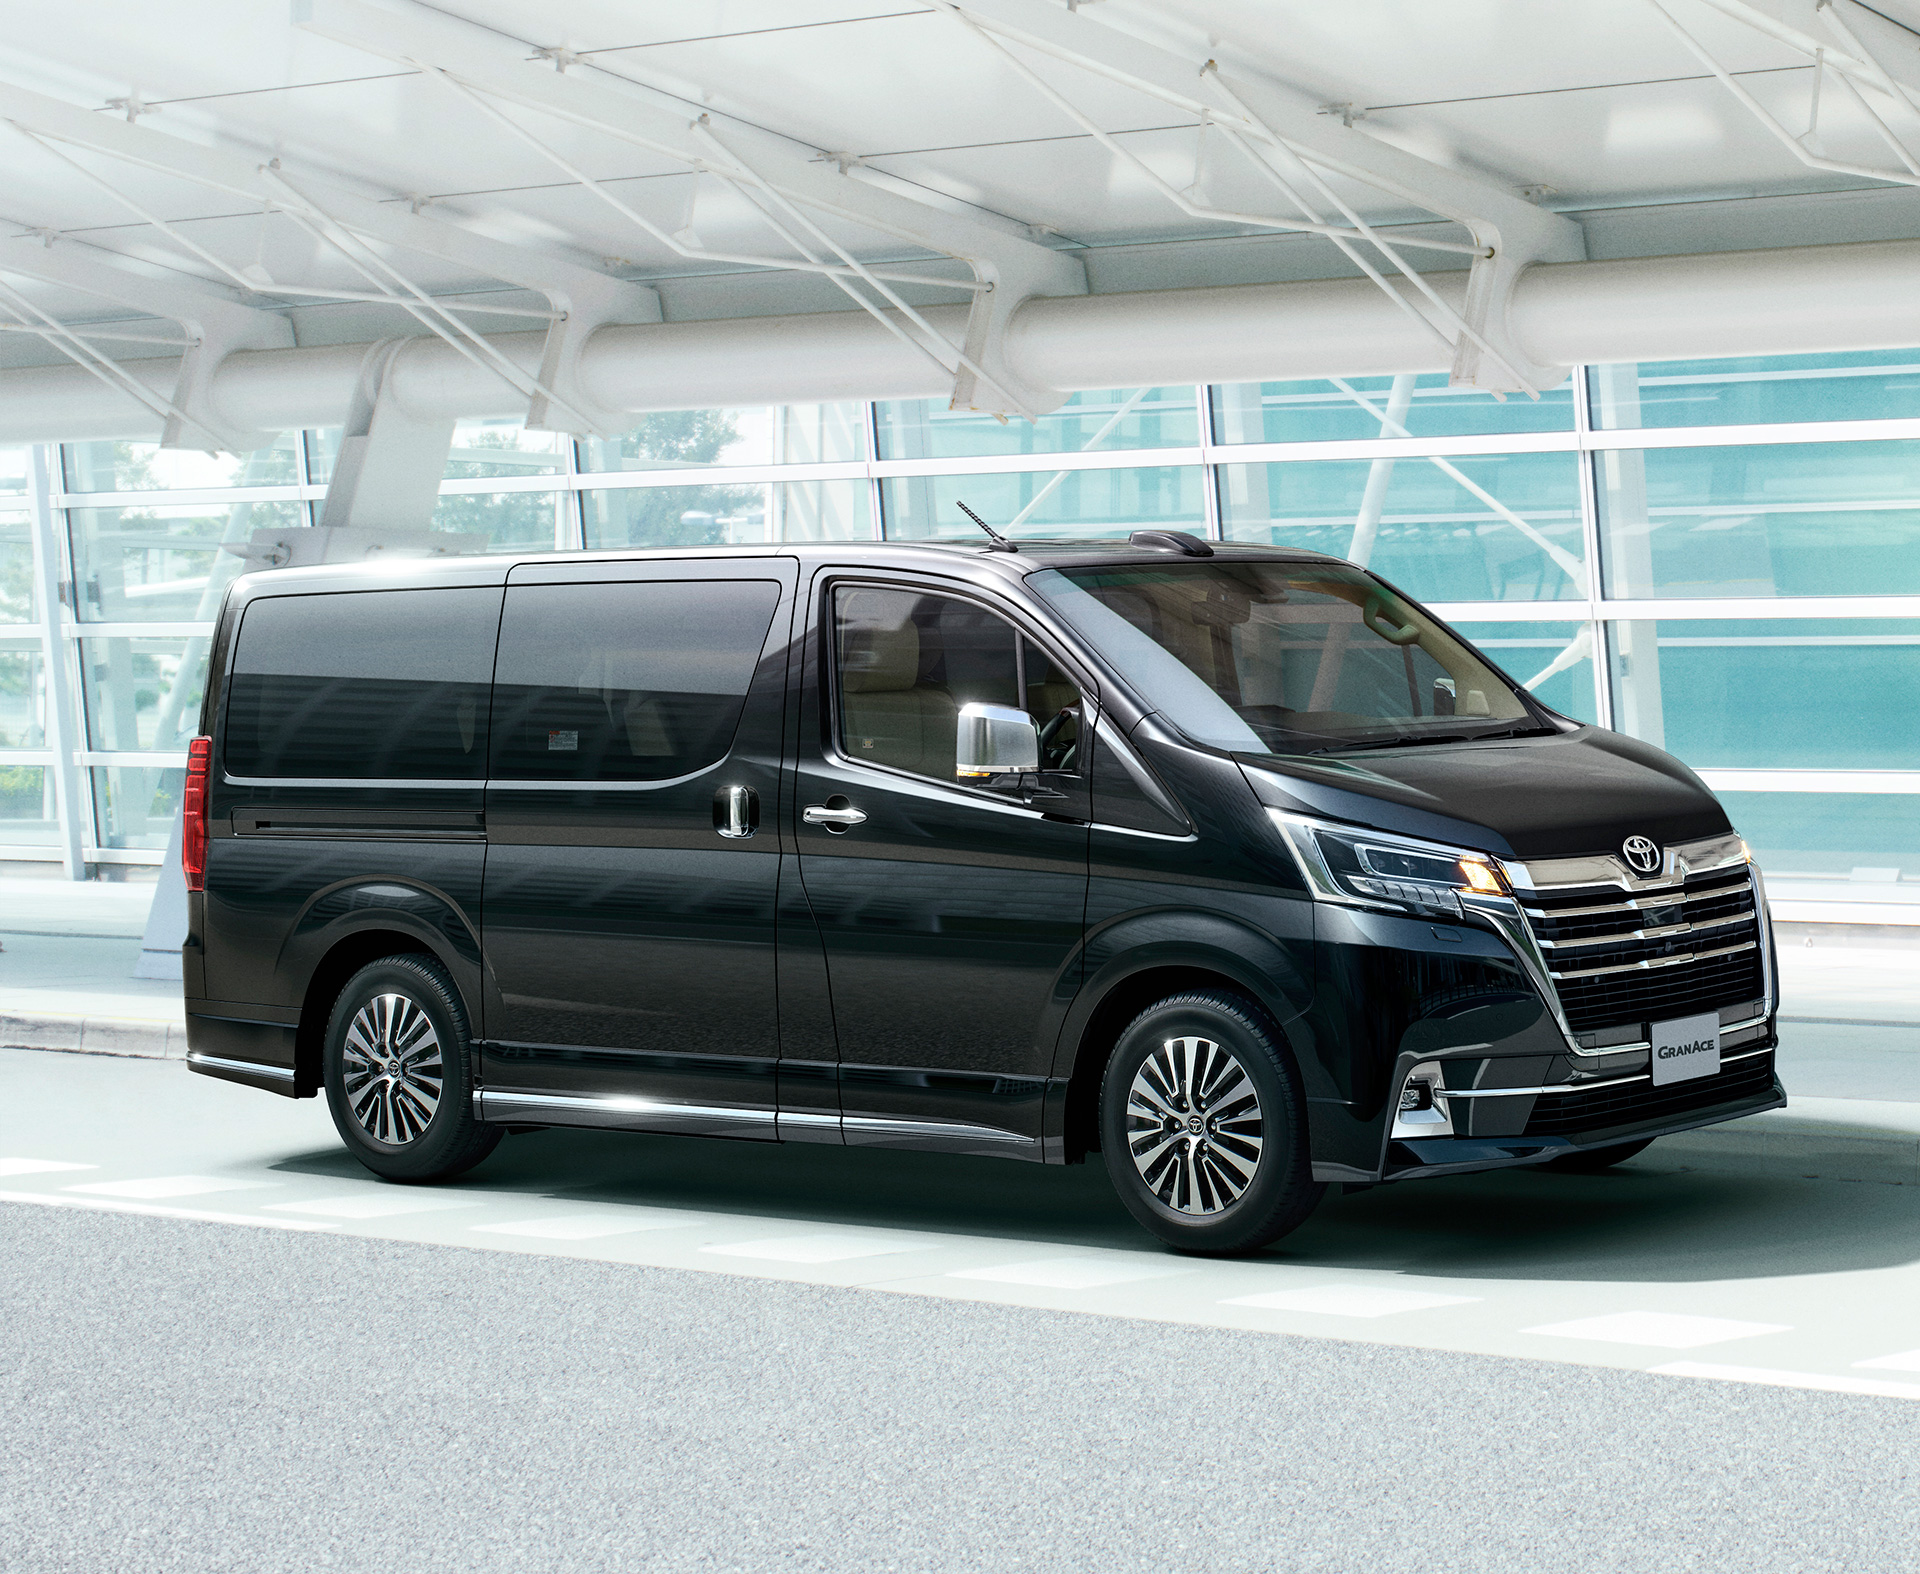 Toyota to Launch New Model "Granace" in JapanSales of large luxury wagon to start from December 16 - Image 2